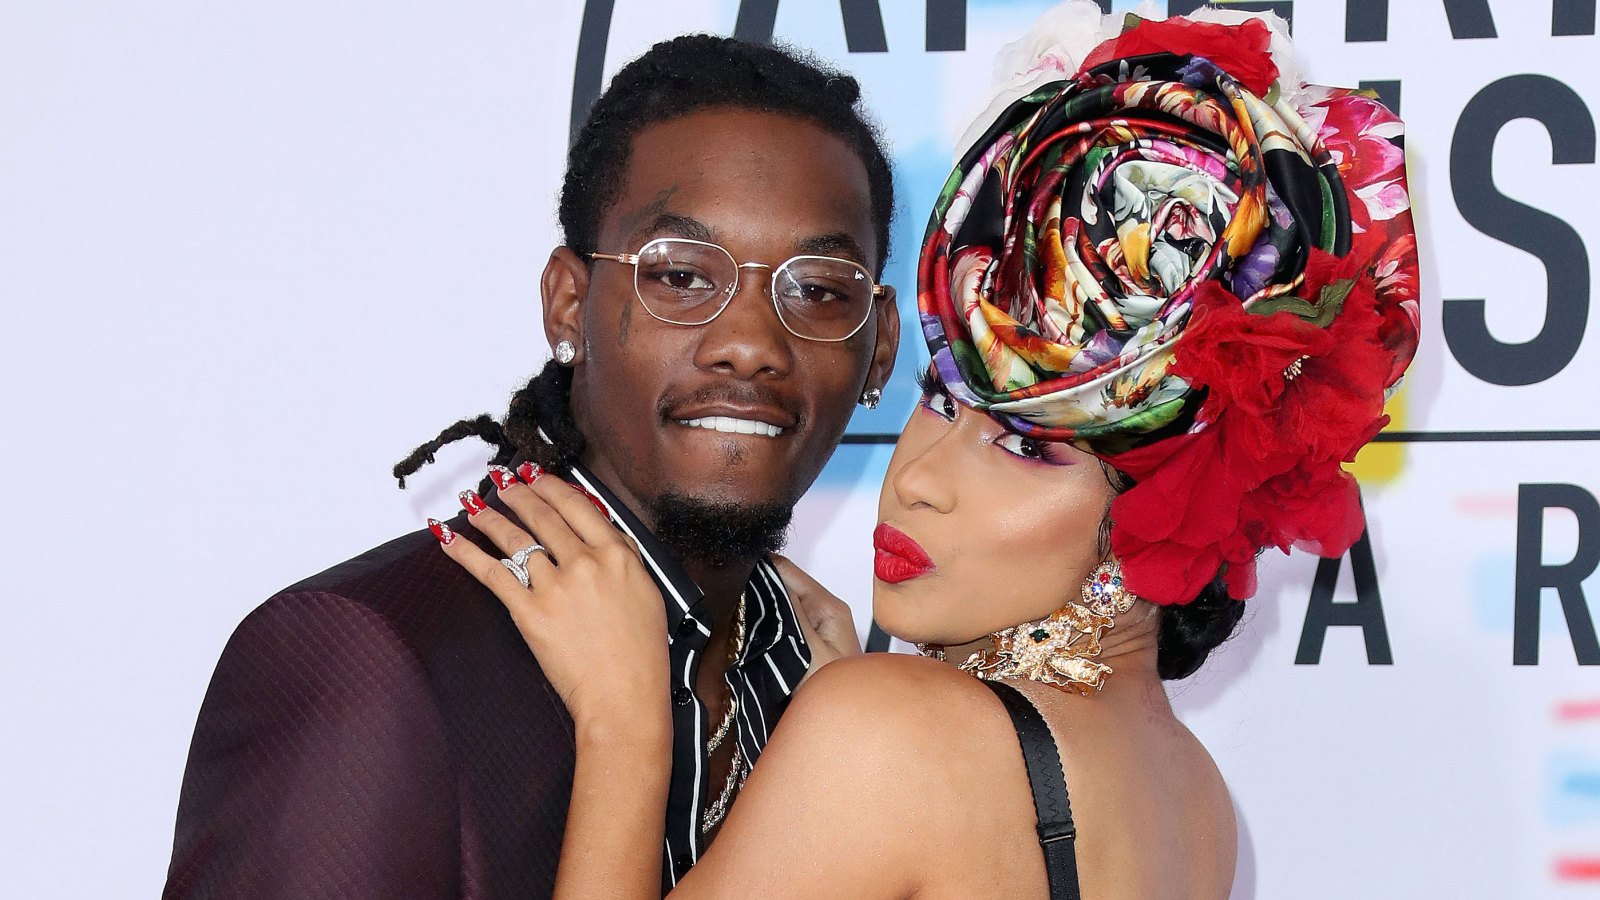 Cardi B Celebrates 2nd Wedding Anniversary With Offset in Sweet Instagram Post